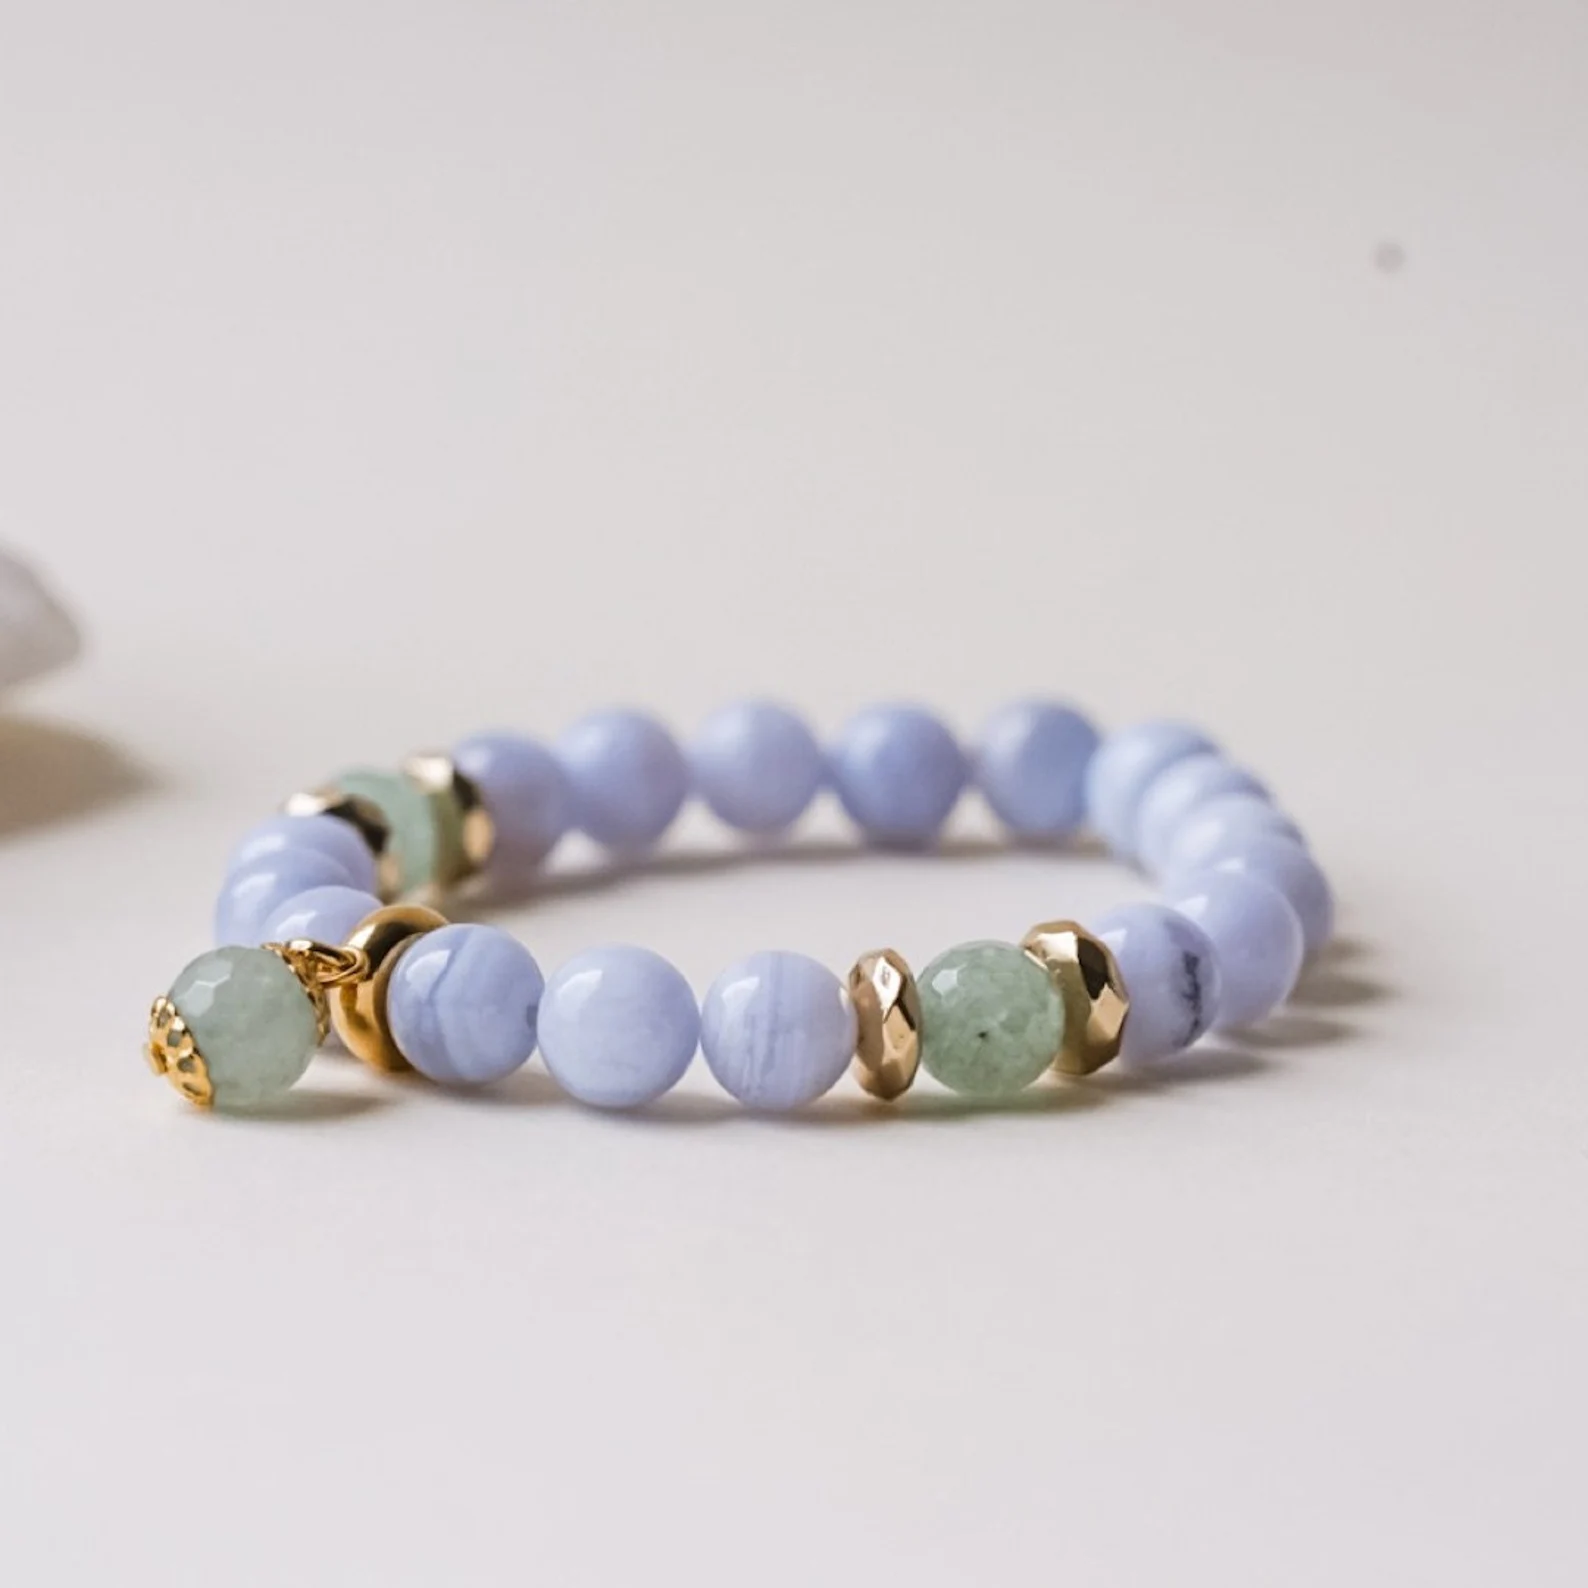 blue lace agate and green aventurine bracelet